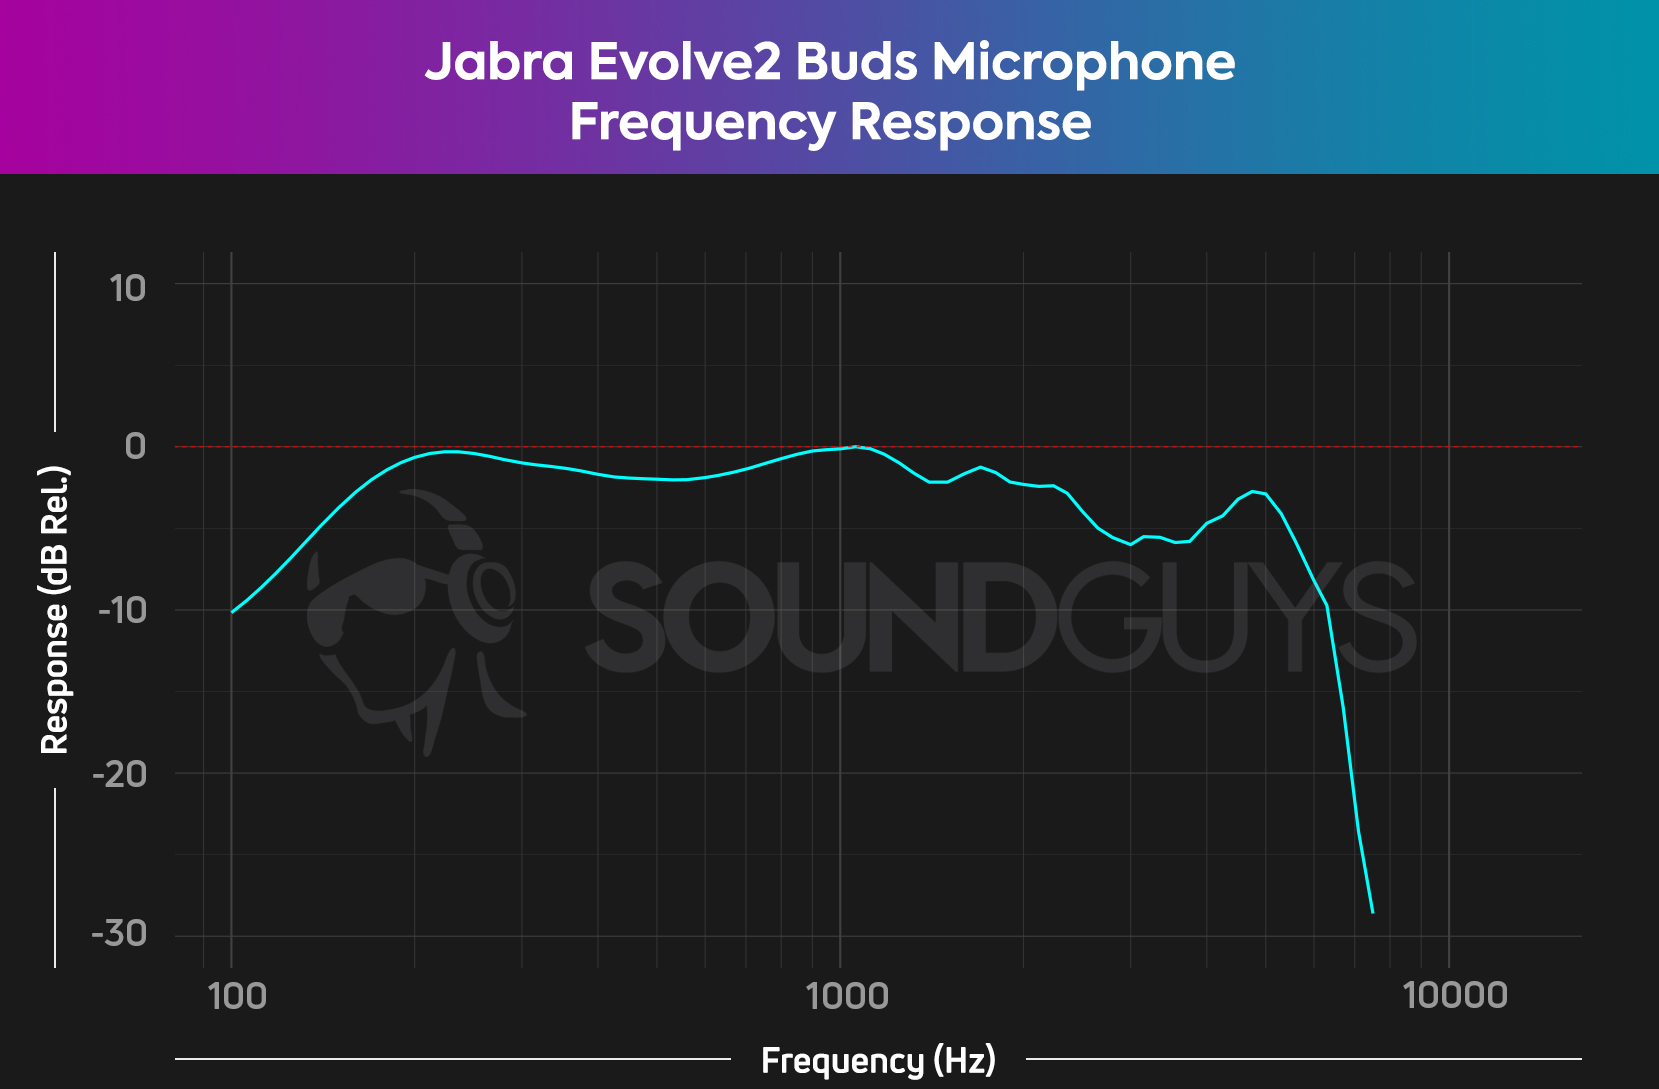 A chart depicts the frequency response for the Jabra Evolve2 Buds microphone.